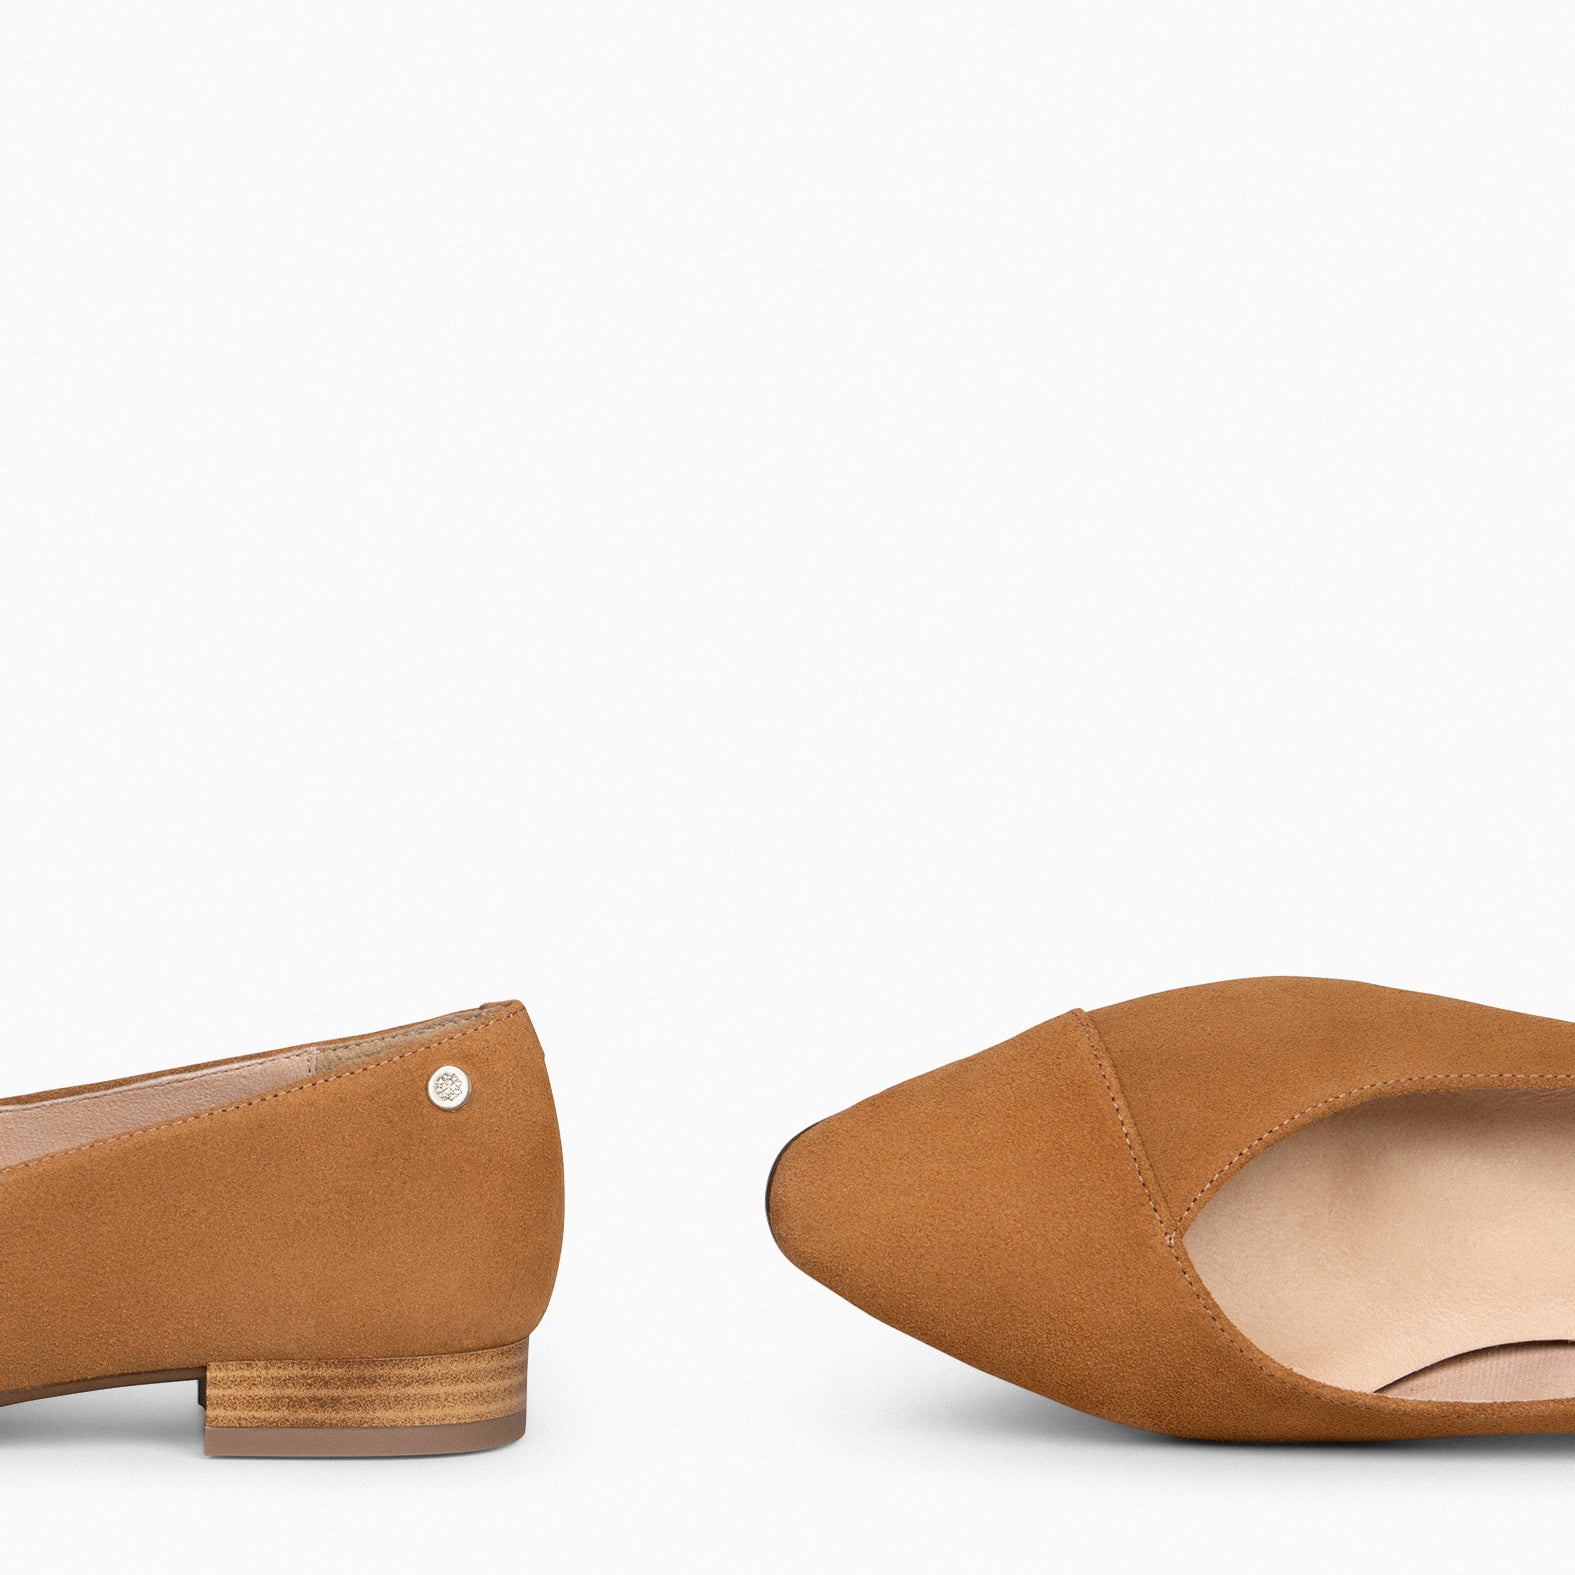 MARIE – CAMEL pointed flats